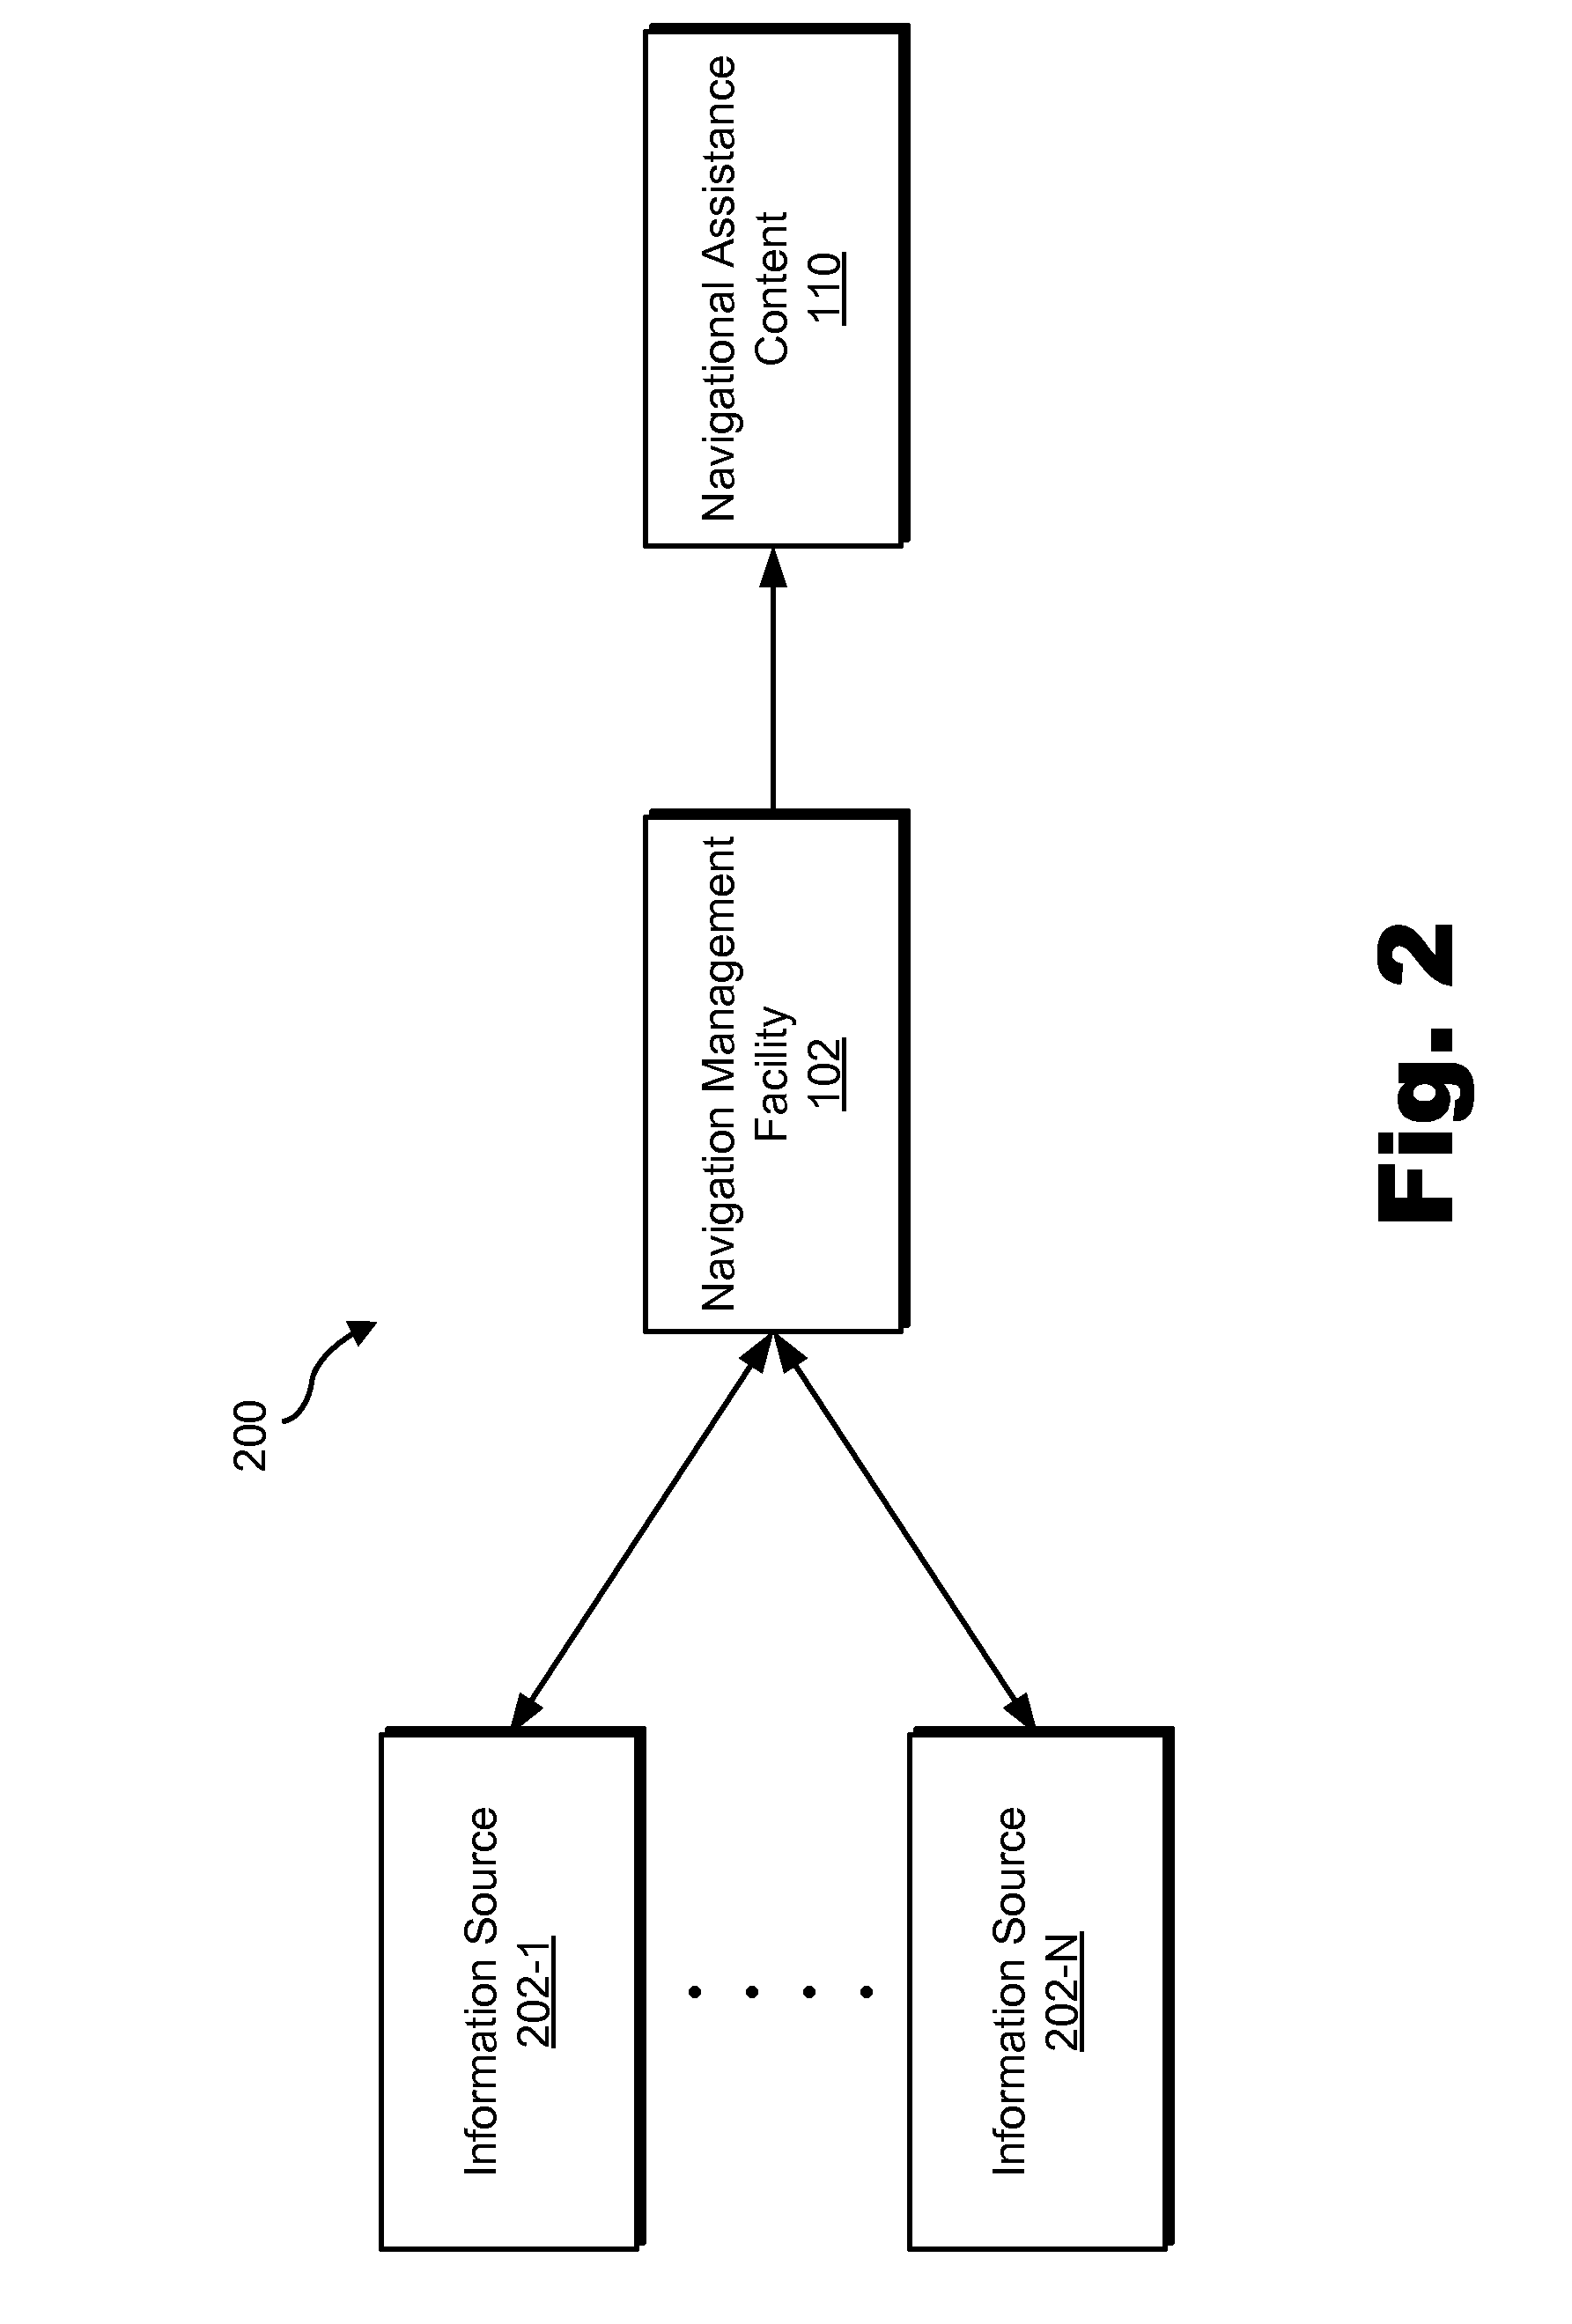 Personal Navigation Assistance Systems and Methods